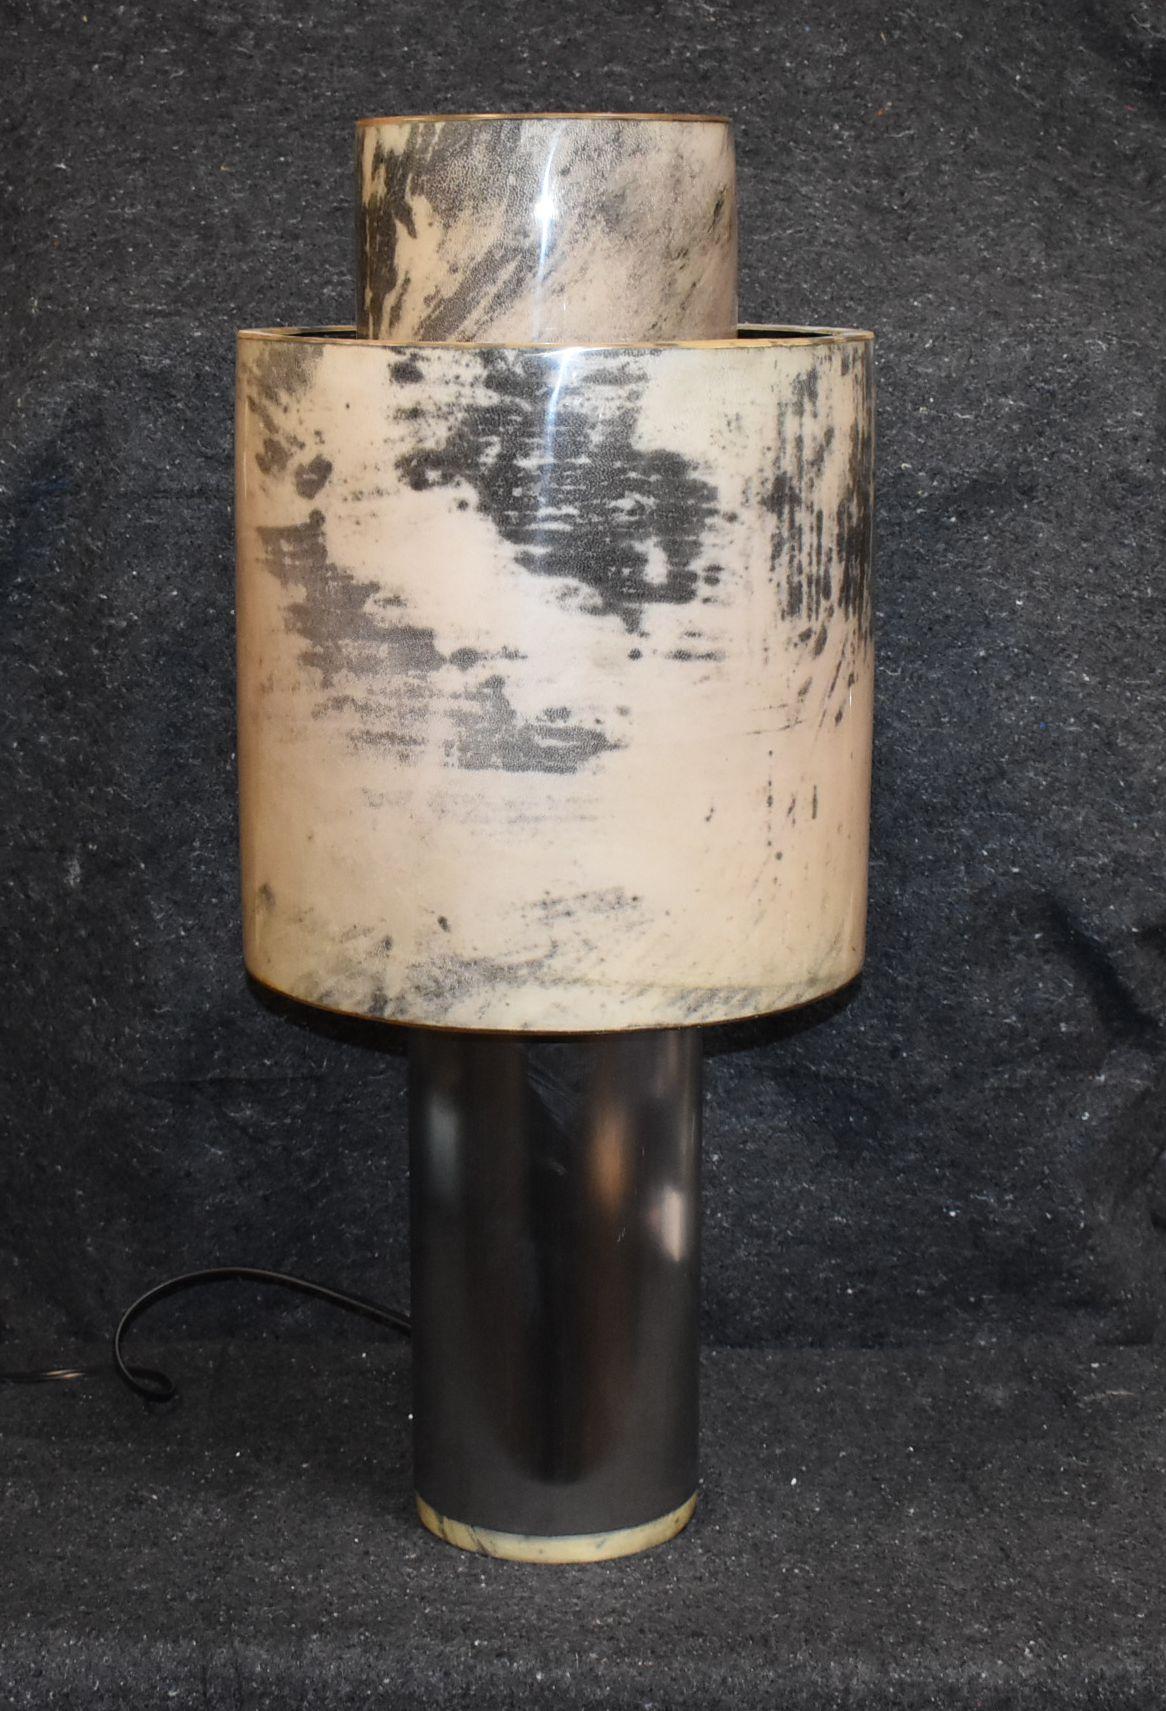 Tall steel (Matte Finish) table lamp with goatskin base and shade. (Single Socket)
Parchment is in varying shades of very light and dark gray. (High gloss polyester resin filled finish). 

Additional dimensions of lamp shade:
Diameter 14